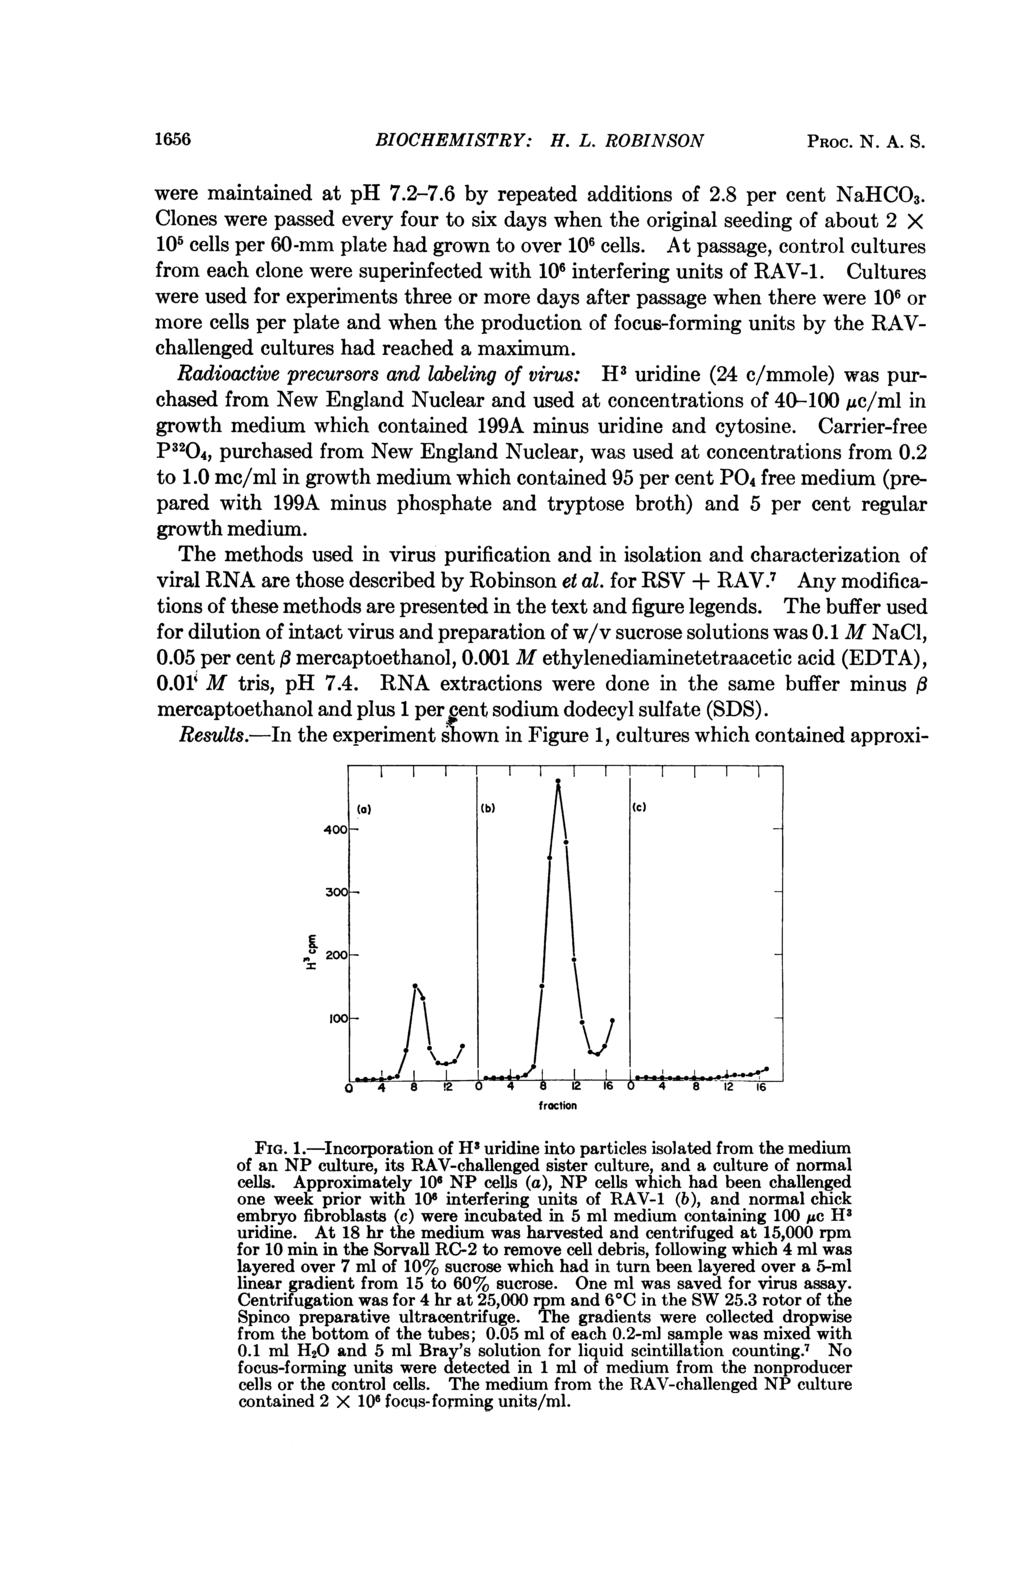 1656 BIOCHEMISTRY: H. L. ROBINSON PROC. N. A. S. I II I I (a) Wb Ic) 400A were maintained at ph 7.2-7.6 by repeated additions of 2.8 per cent NaHCO3.